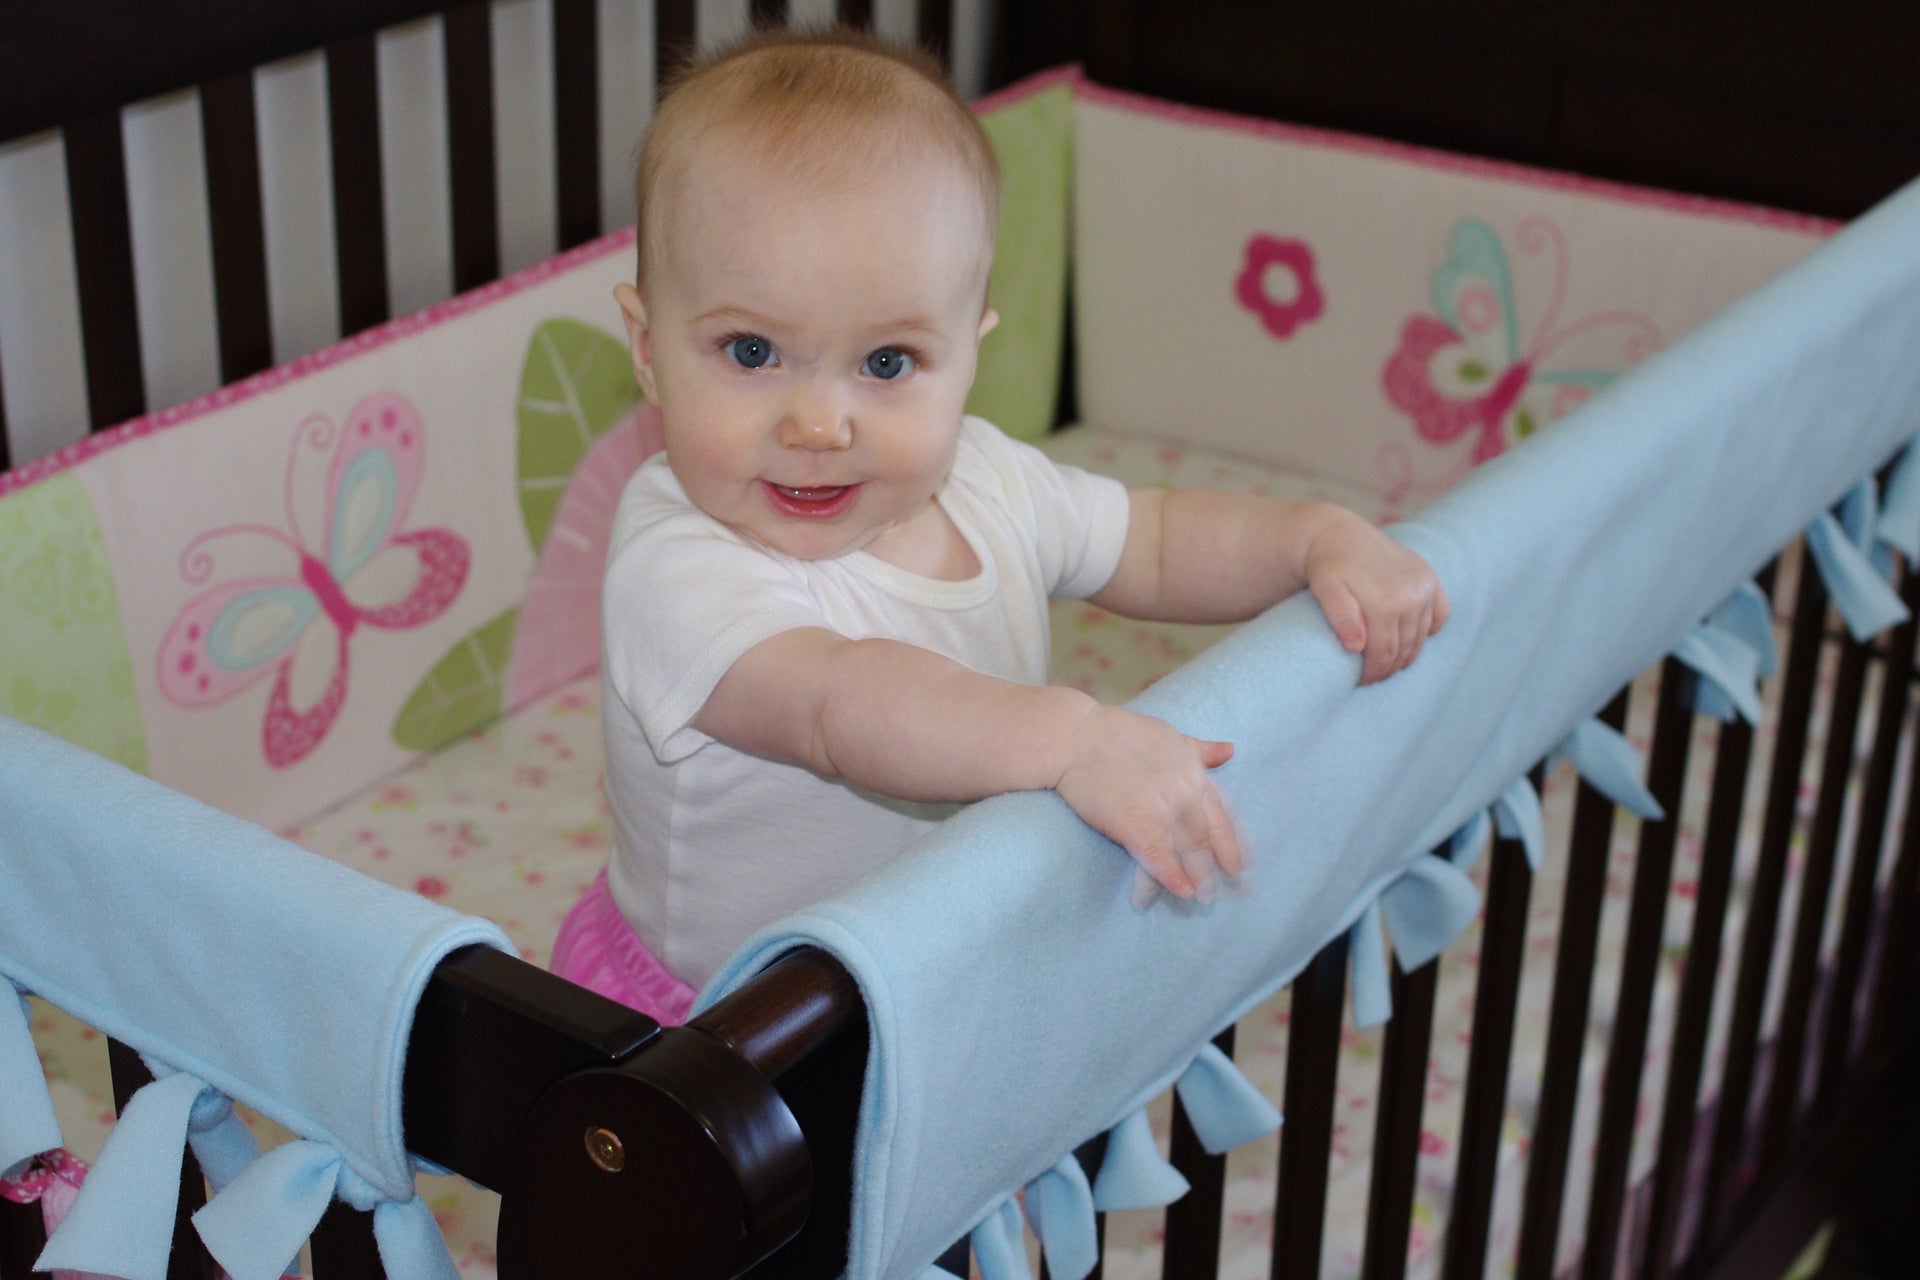 How to Install a Bumper Pad on a Crib 